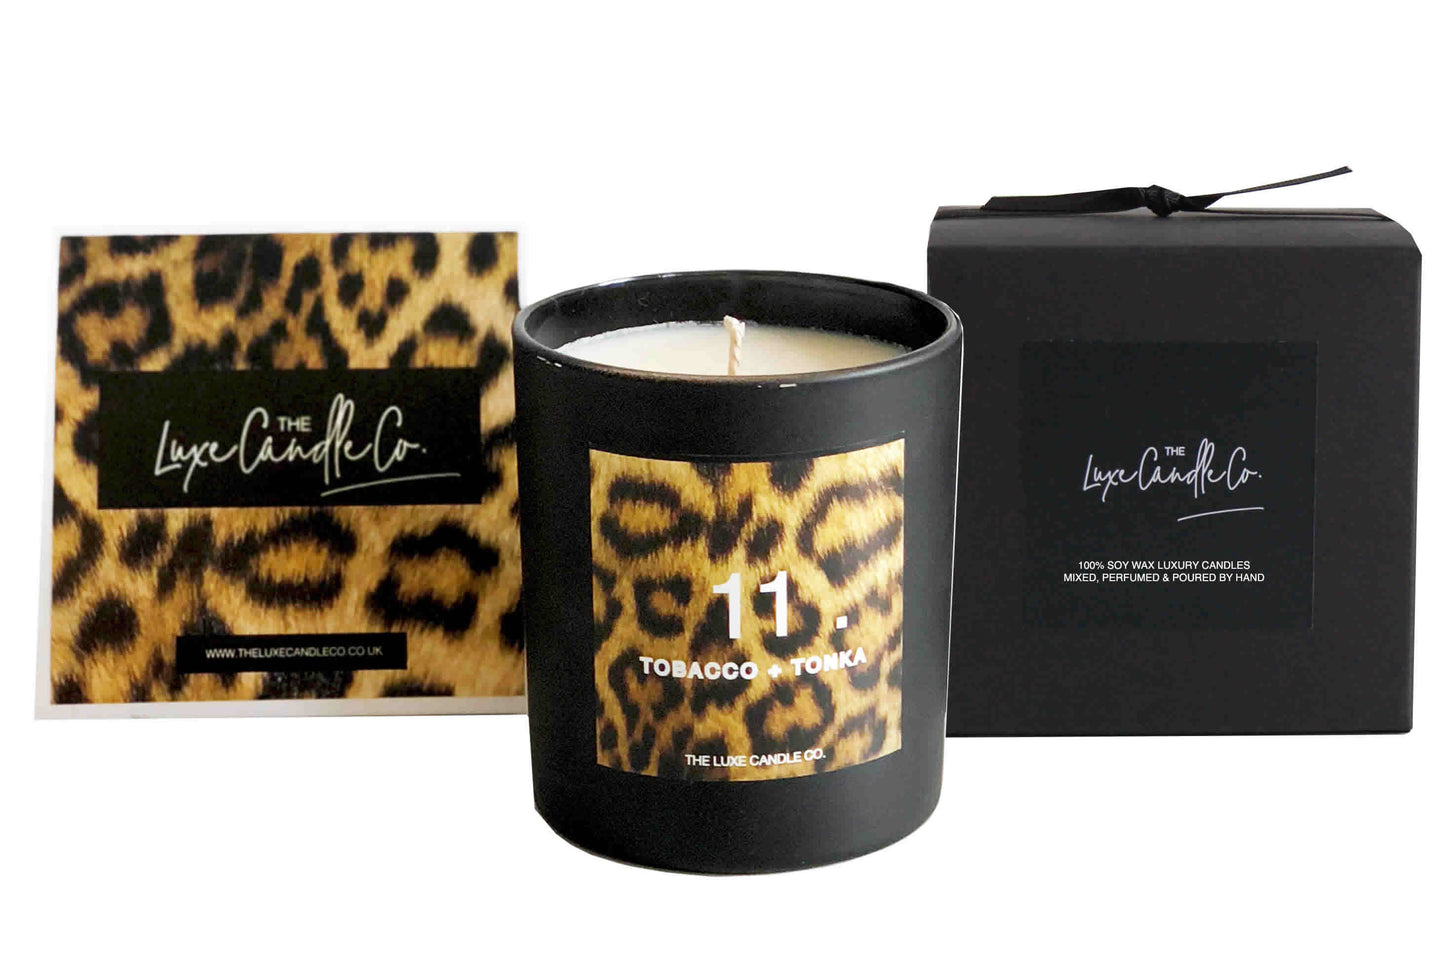 Leopard print gift for her - Luxury soy wax candles by The Luxe Candle Co